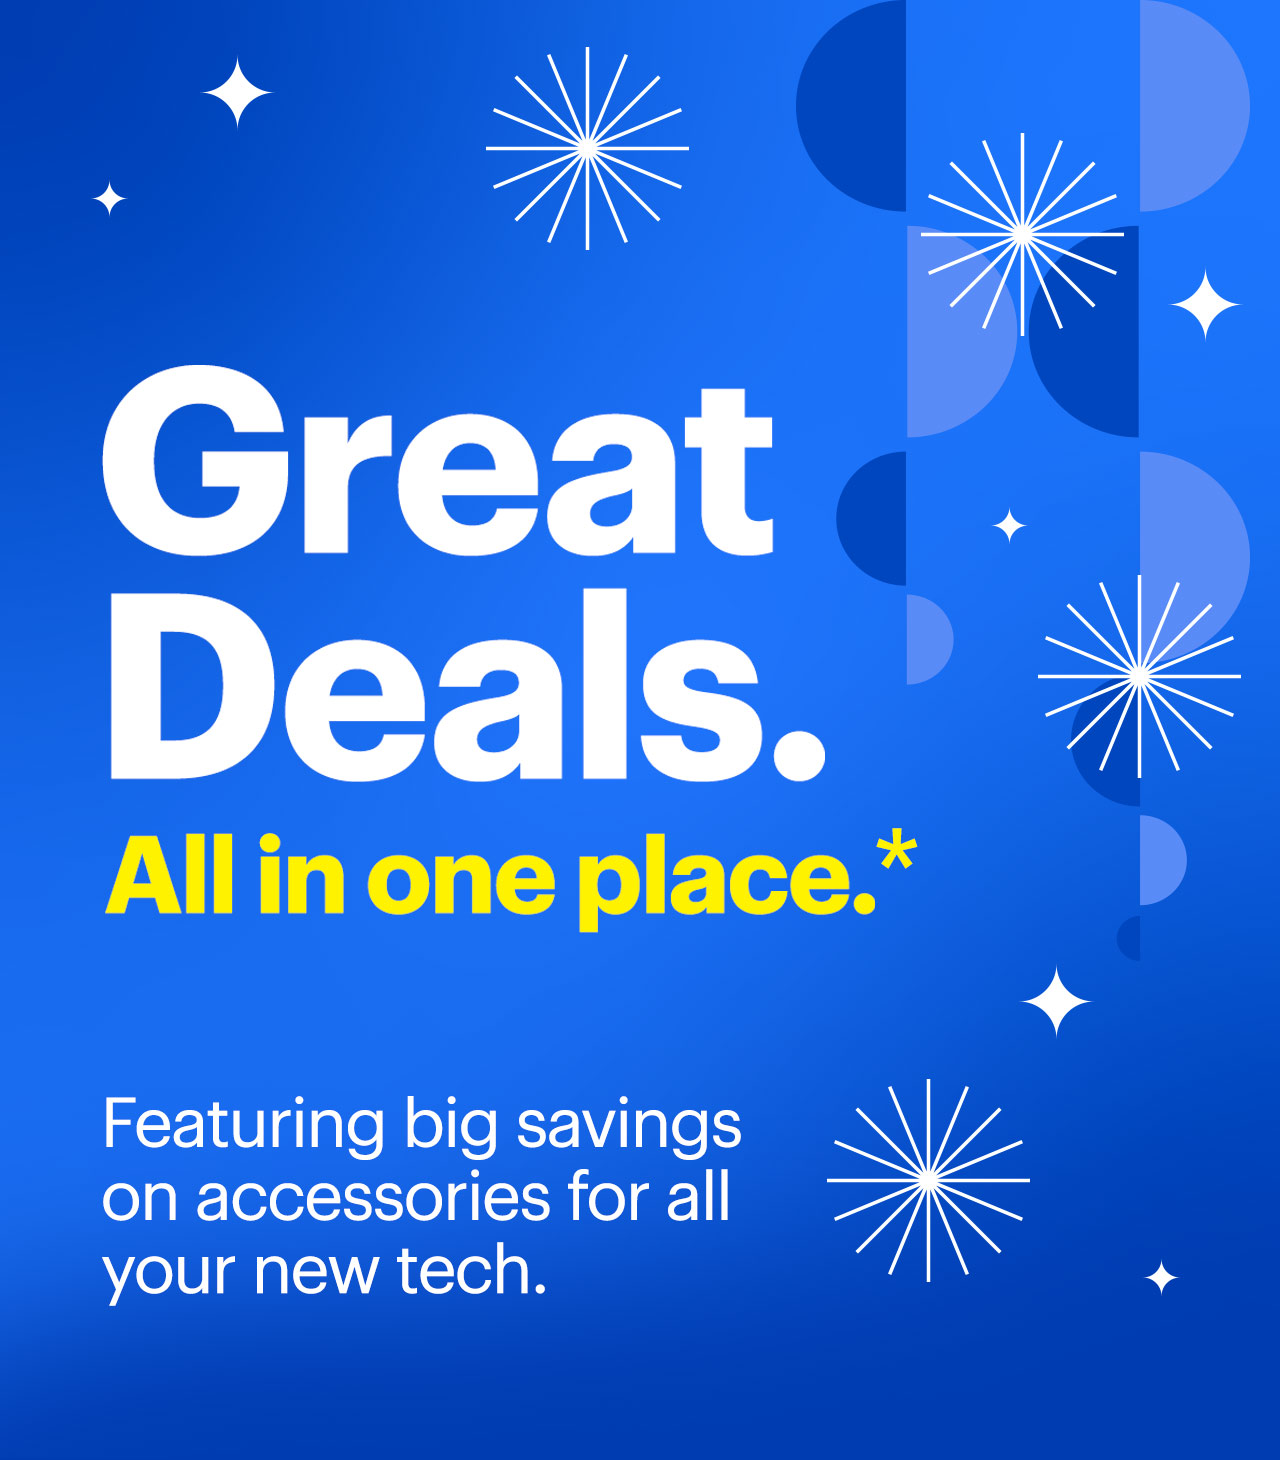 Great deals. All in one place. Featuring big savings on accessories for all your new tech. Reference disclaimer. Great . Deals. Allin one place. * Featuring big savings on accessories for all your new tech. S 